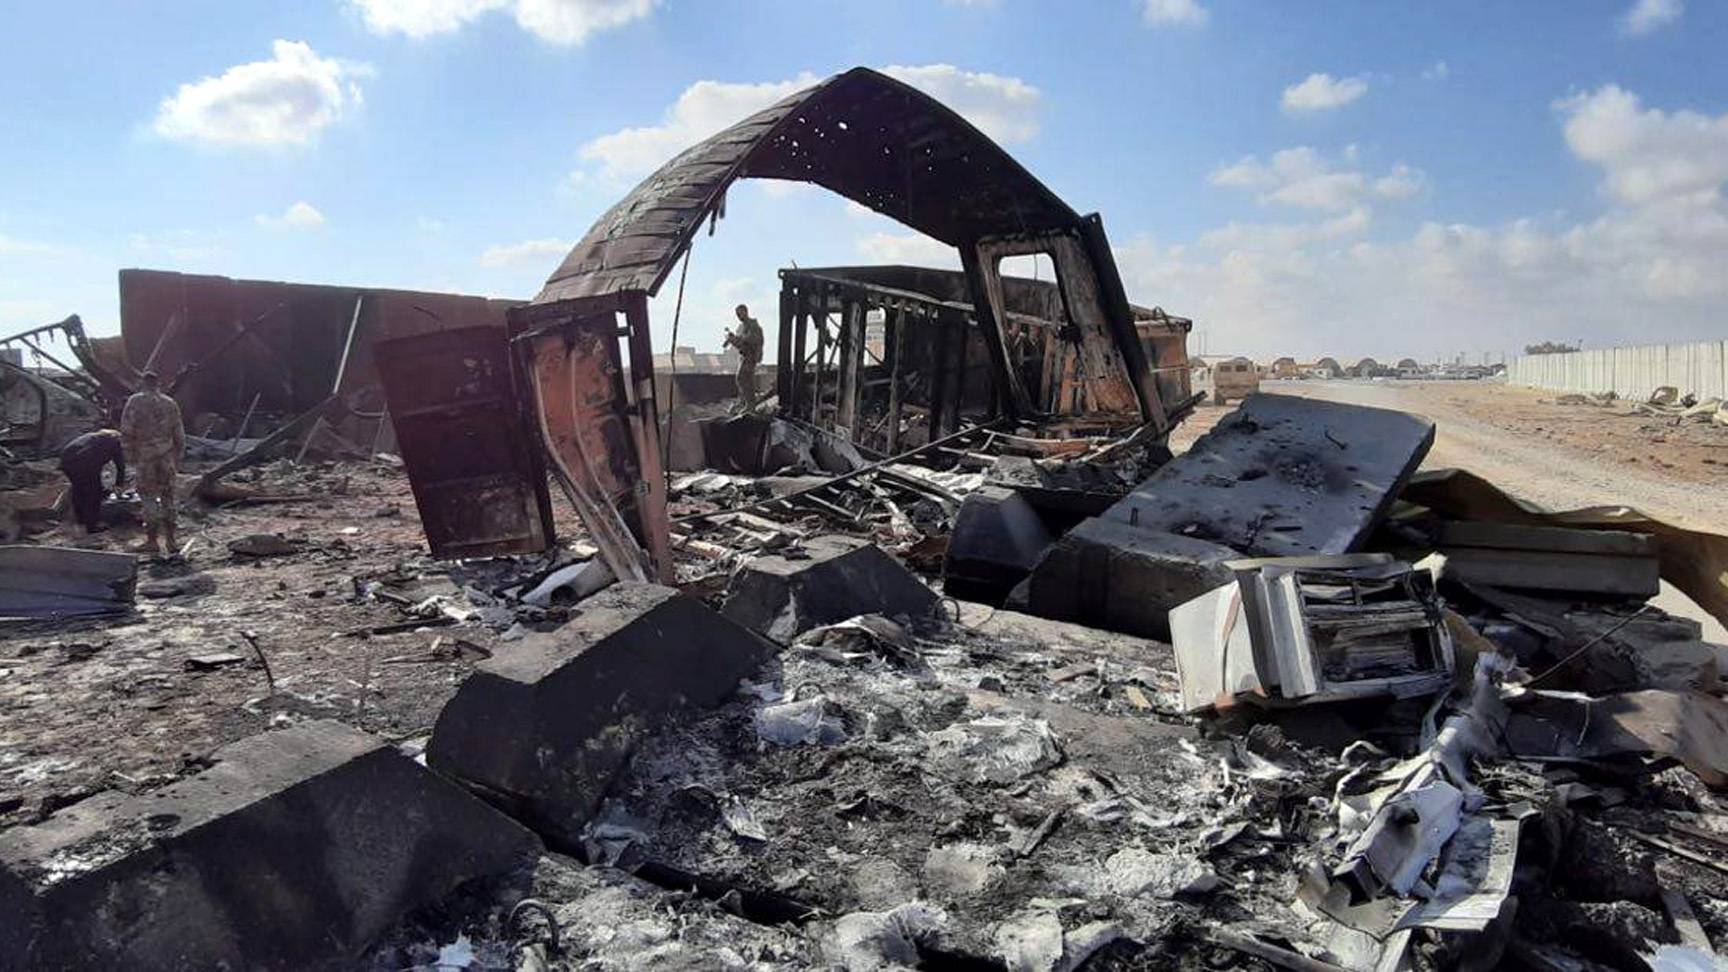 epa08127720 US soldiers stand next the damage that caused by the Iran&#039;s missiles attack inside Ain al-Assad air base in Anbar province, Iraq, 14 January 2020. Iran&#039;s Revolutionary Guard Crops (IRGC) launched a series of rockets targeting Ain al-Assad air base located in al-Anbar on 08 January 2020, one of the bases hosting US military troops in Iraq. The attack comes days after the Top Iranian General Qasem Soleimani, head of the IRGC&#039;s Quds force, was killed by a US drone strike in Baghdad.  EPA/STR